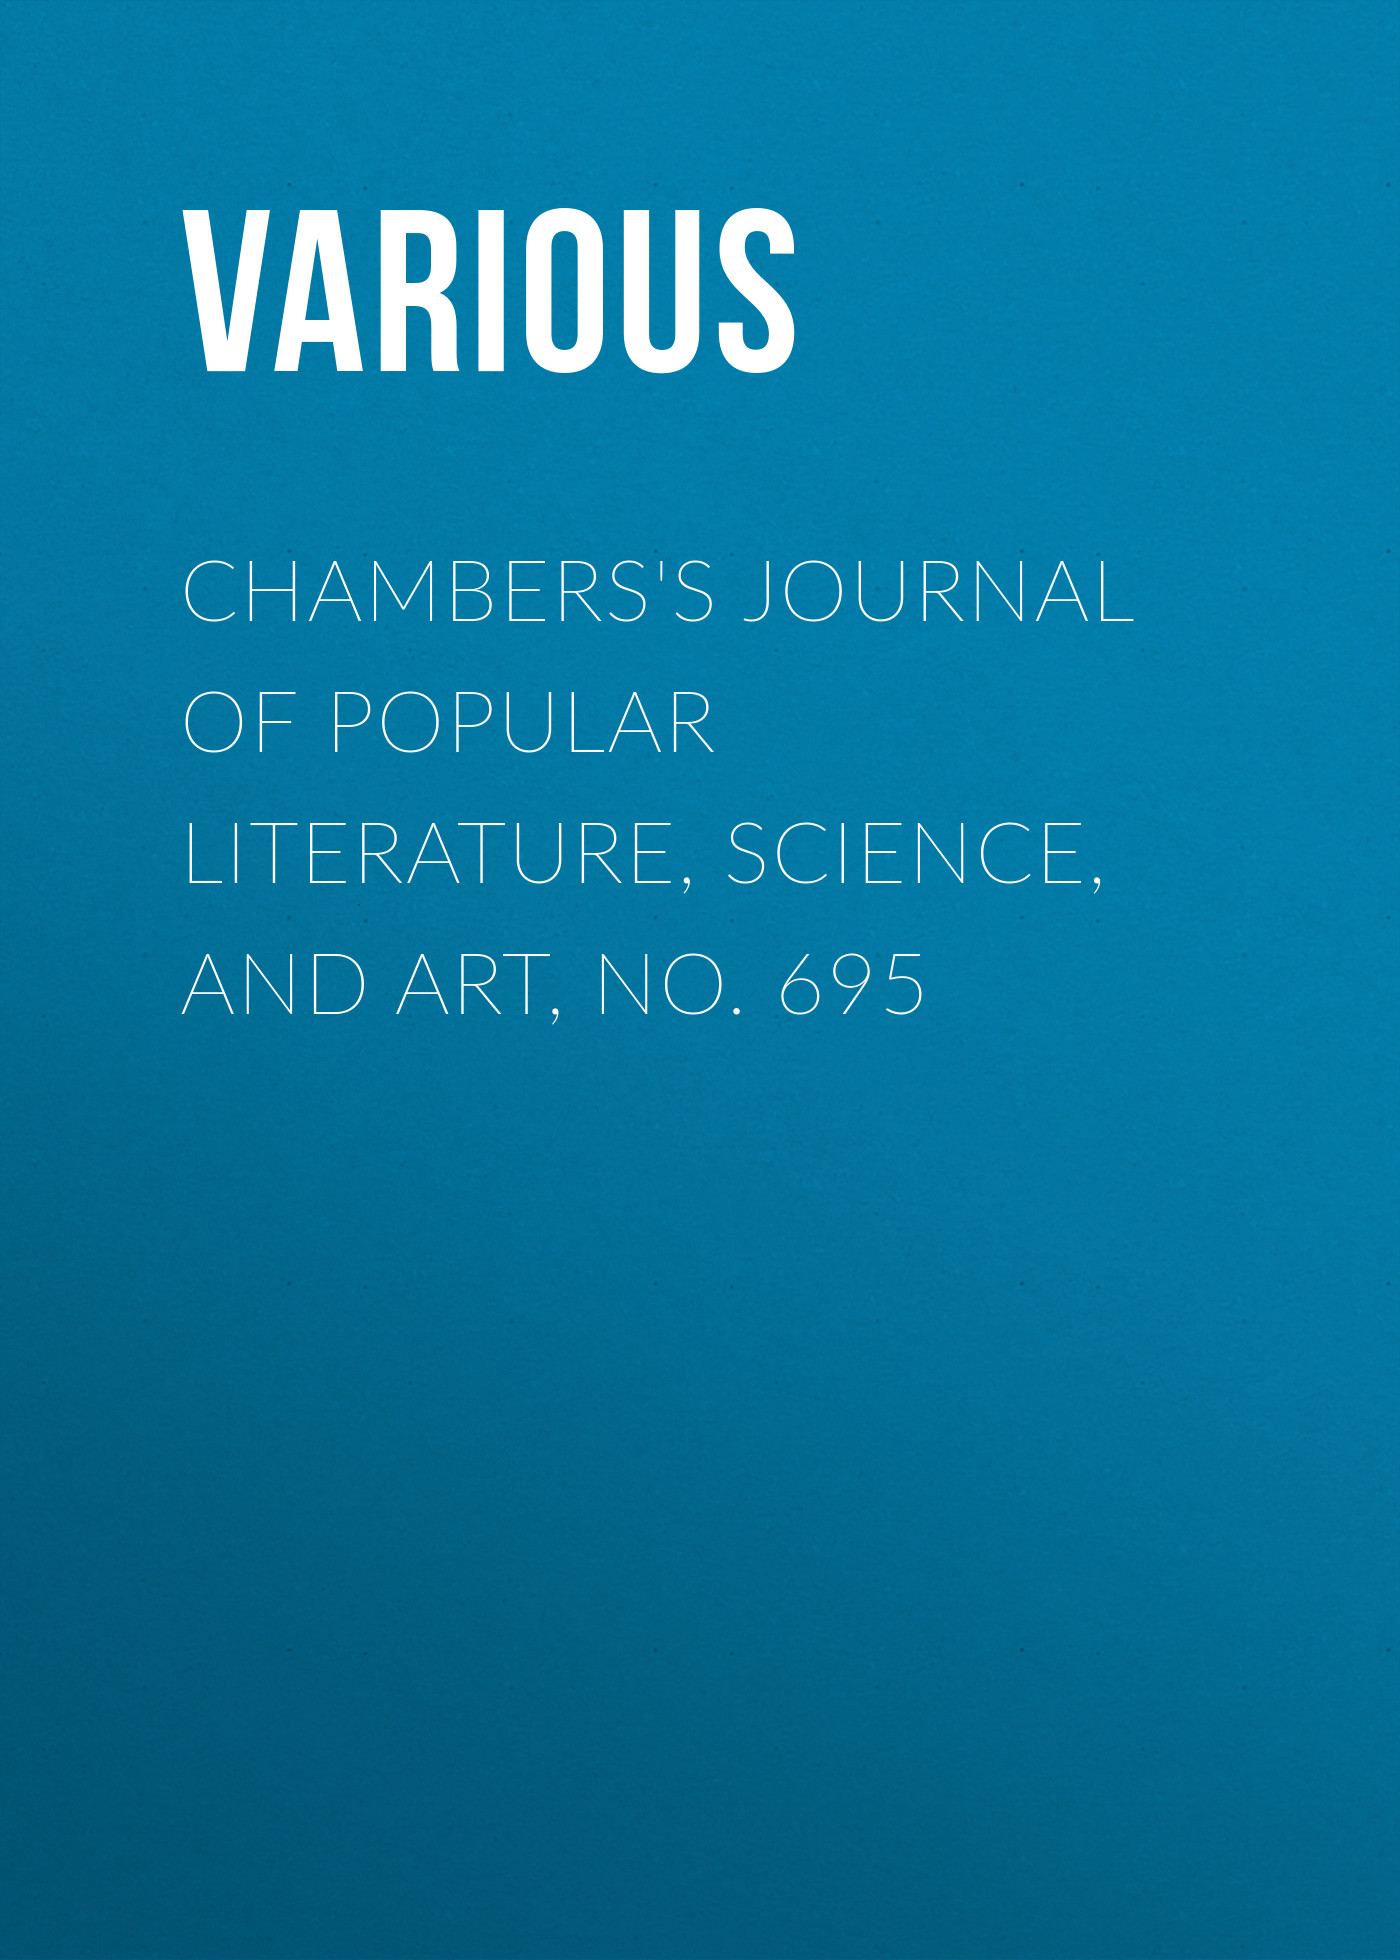 Chambers's Journal of Popular Literature, Science, and Art, No. 695